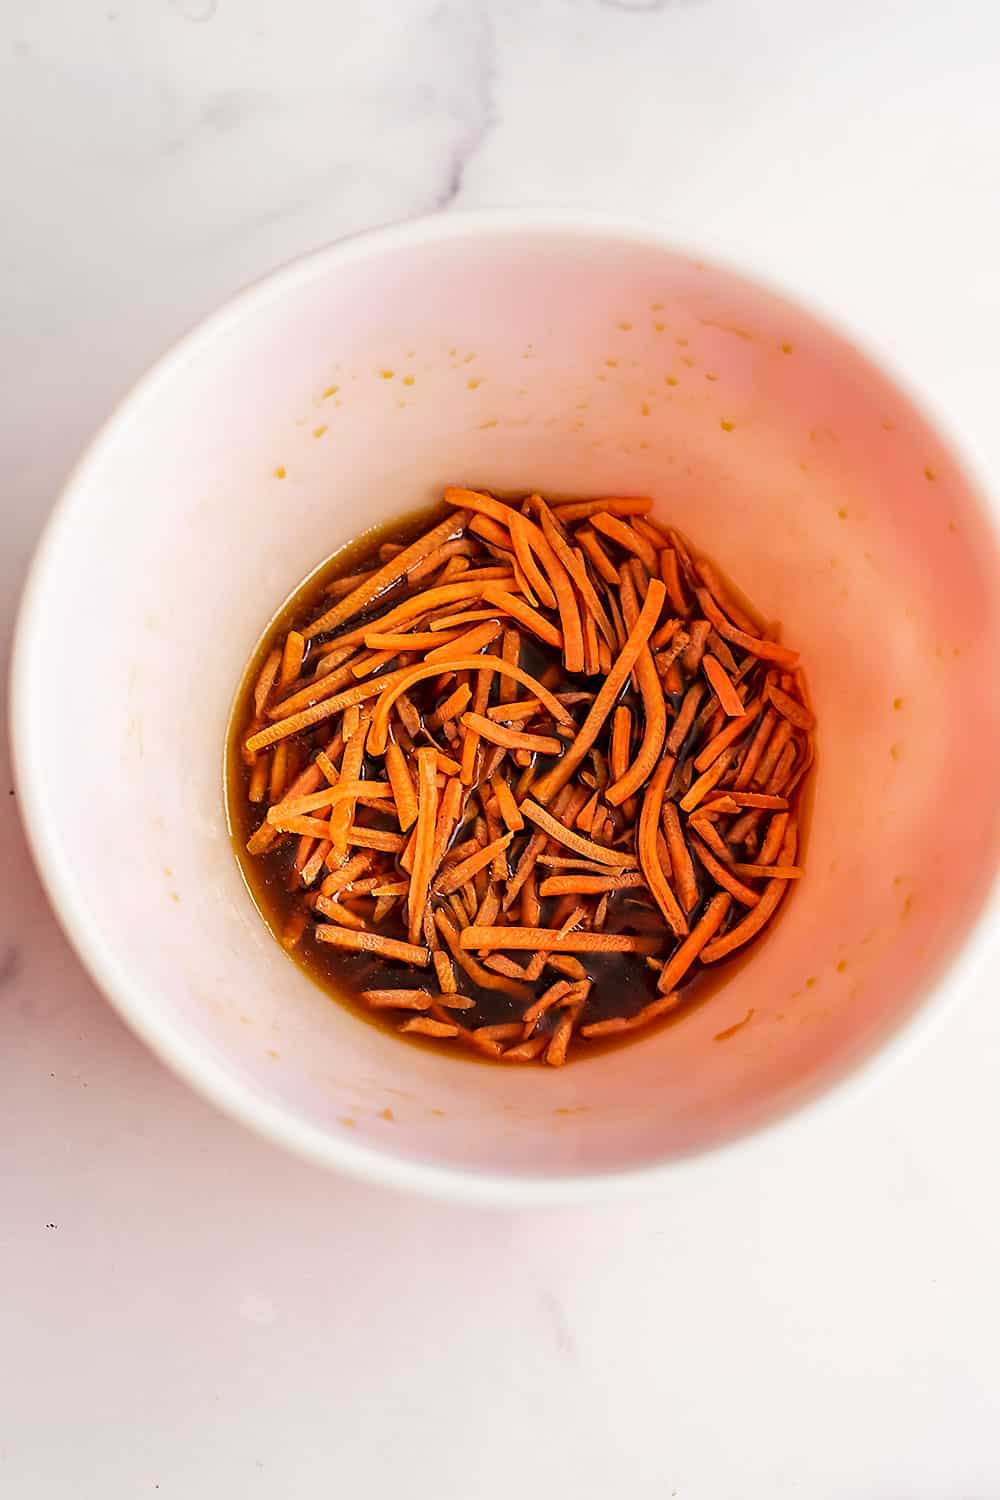 Shredded carrots in bowl with marinade.